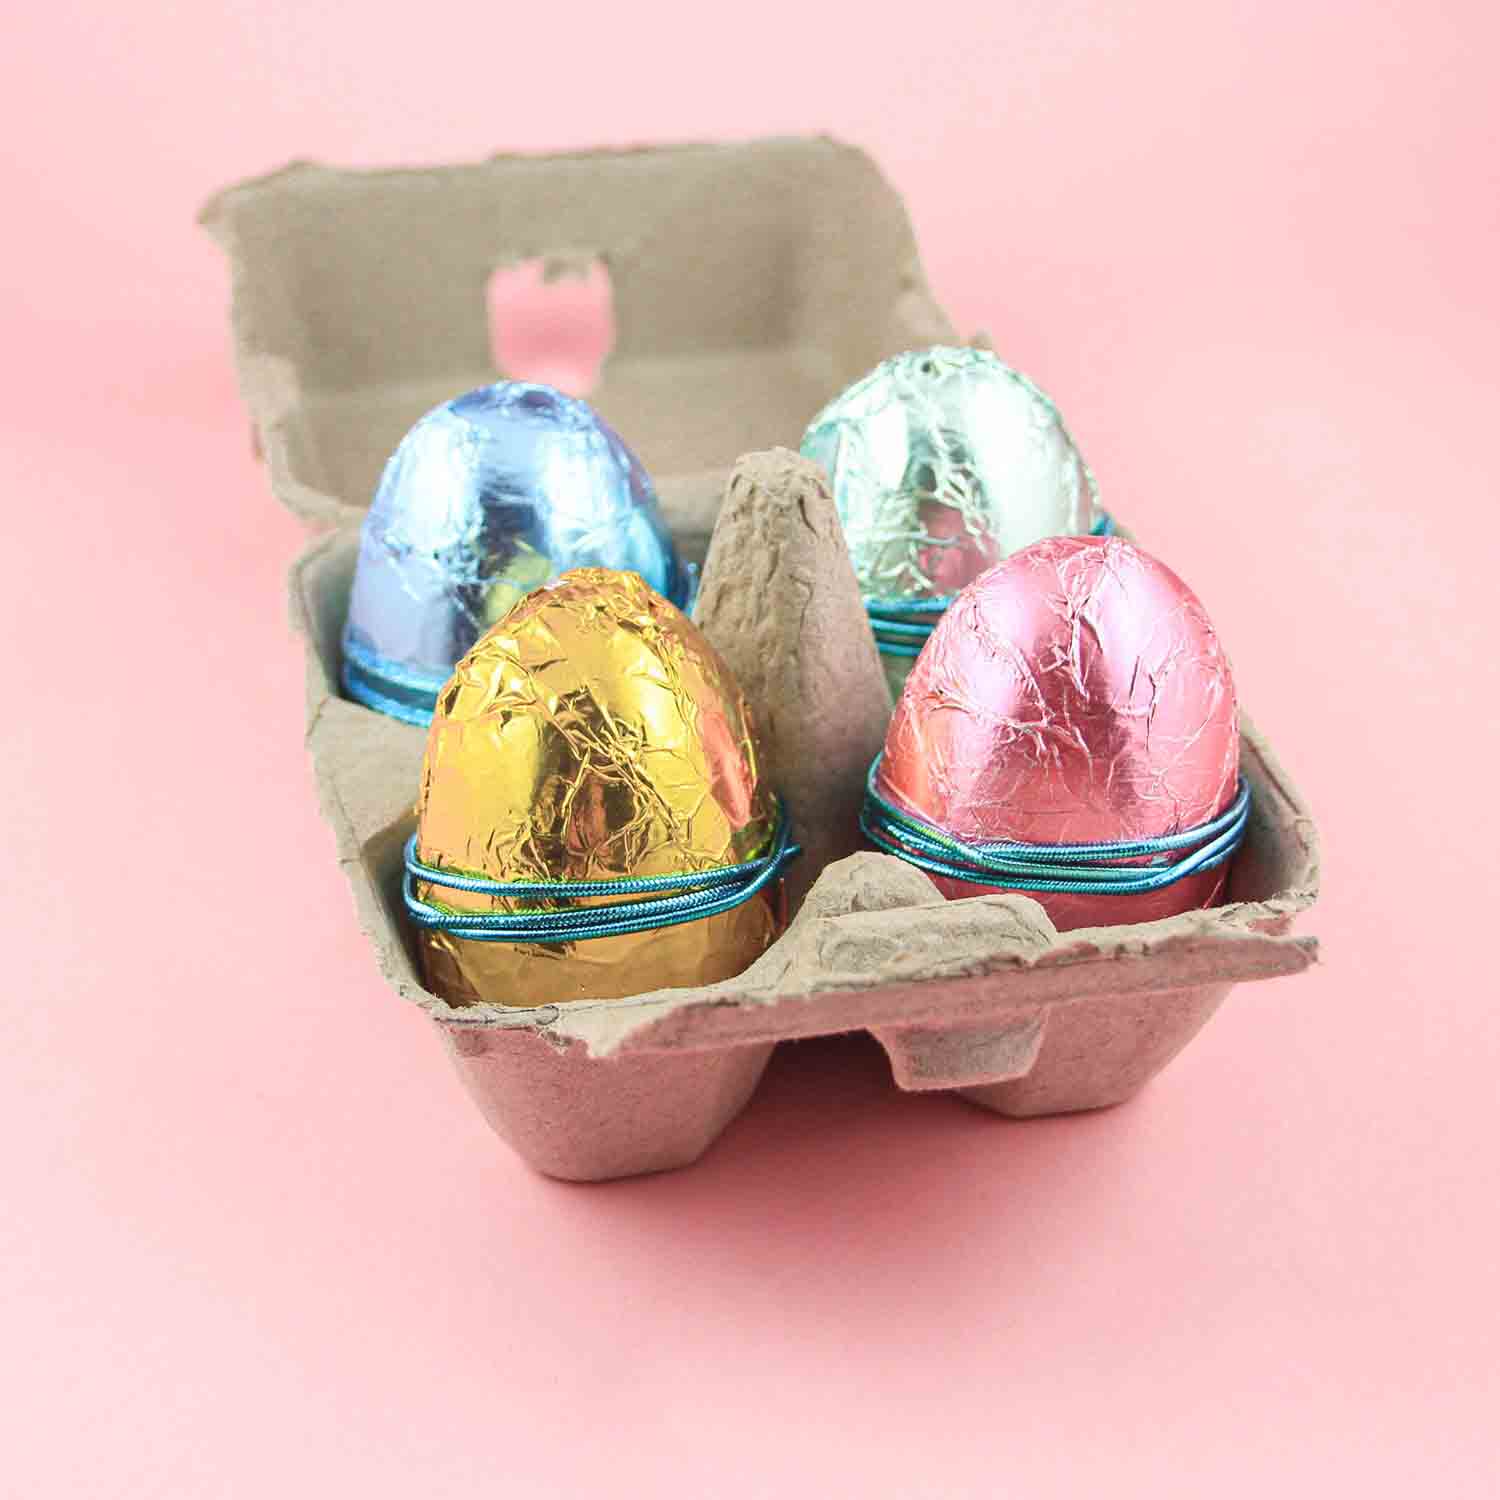 foil wrapped peanut butter eggs in an egg carton.